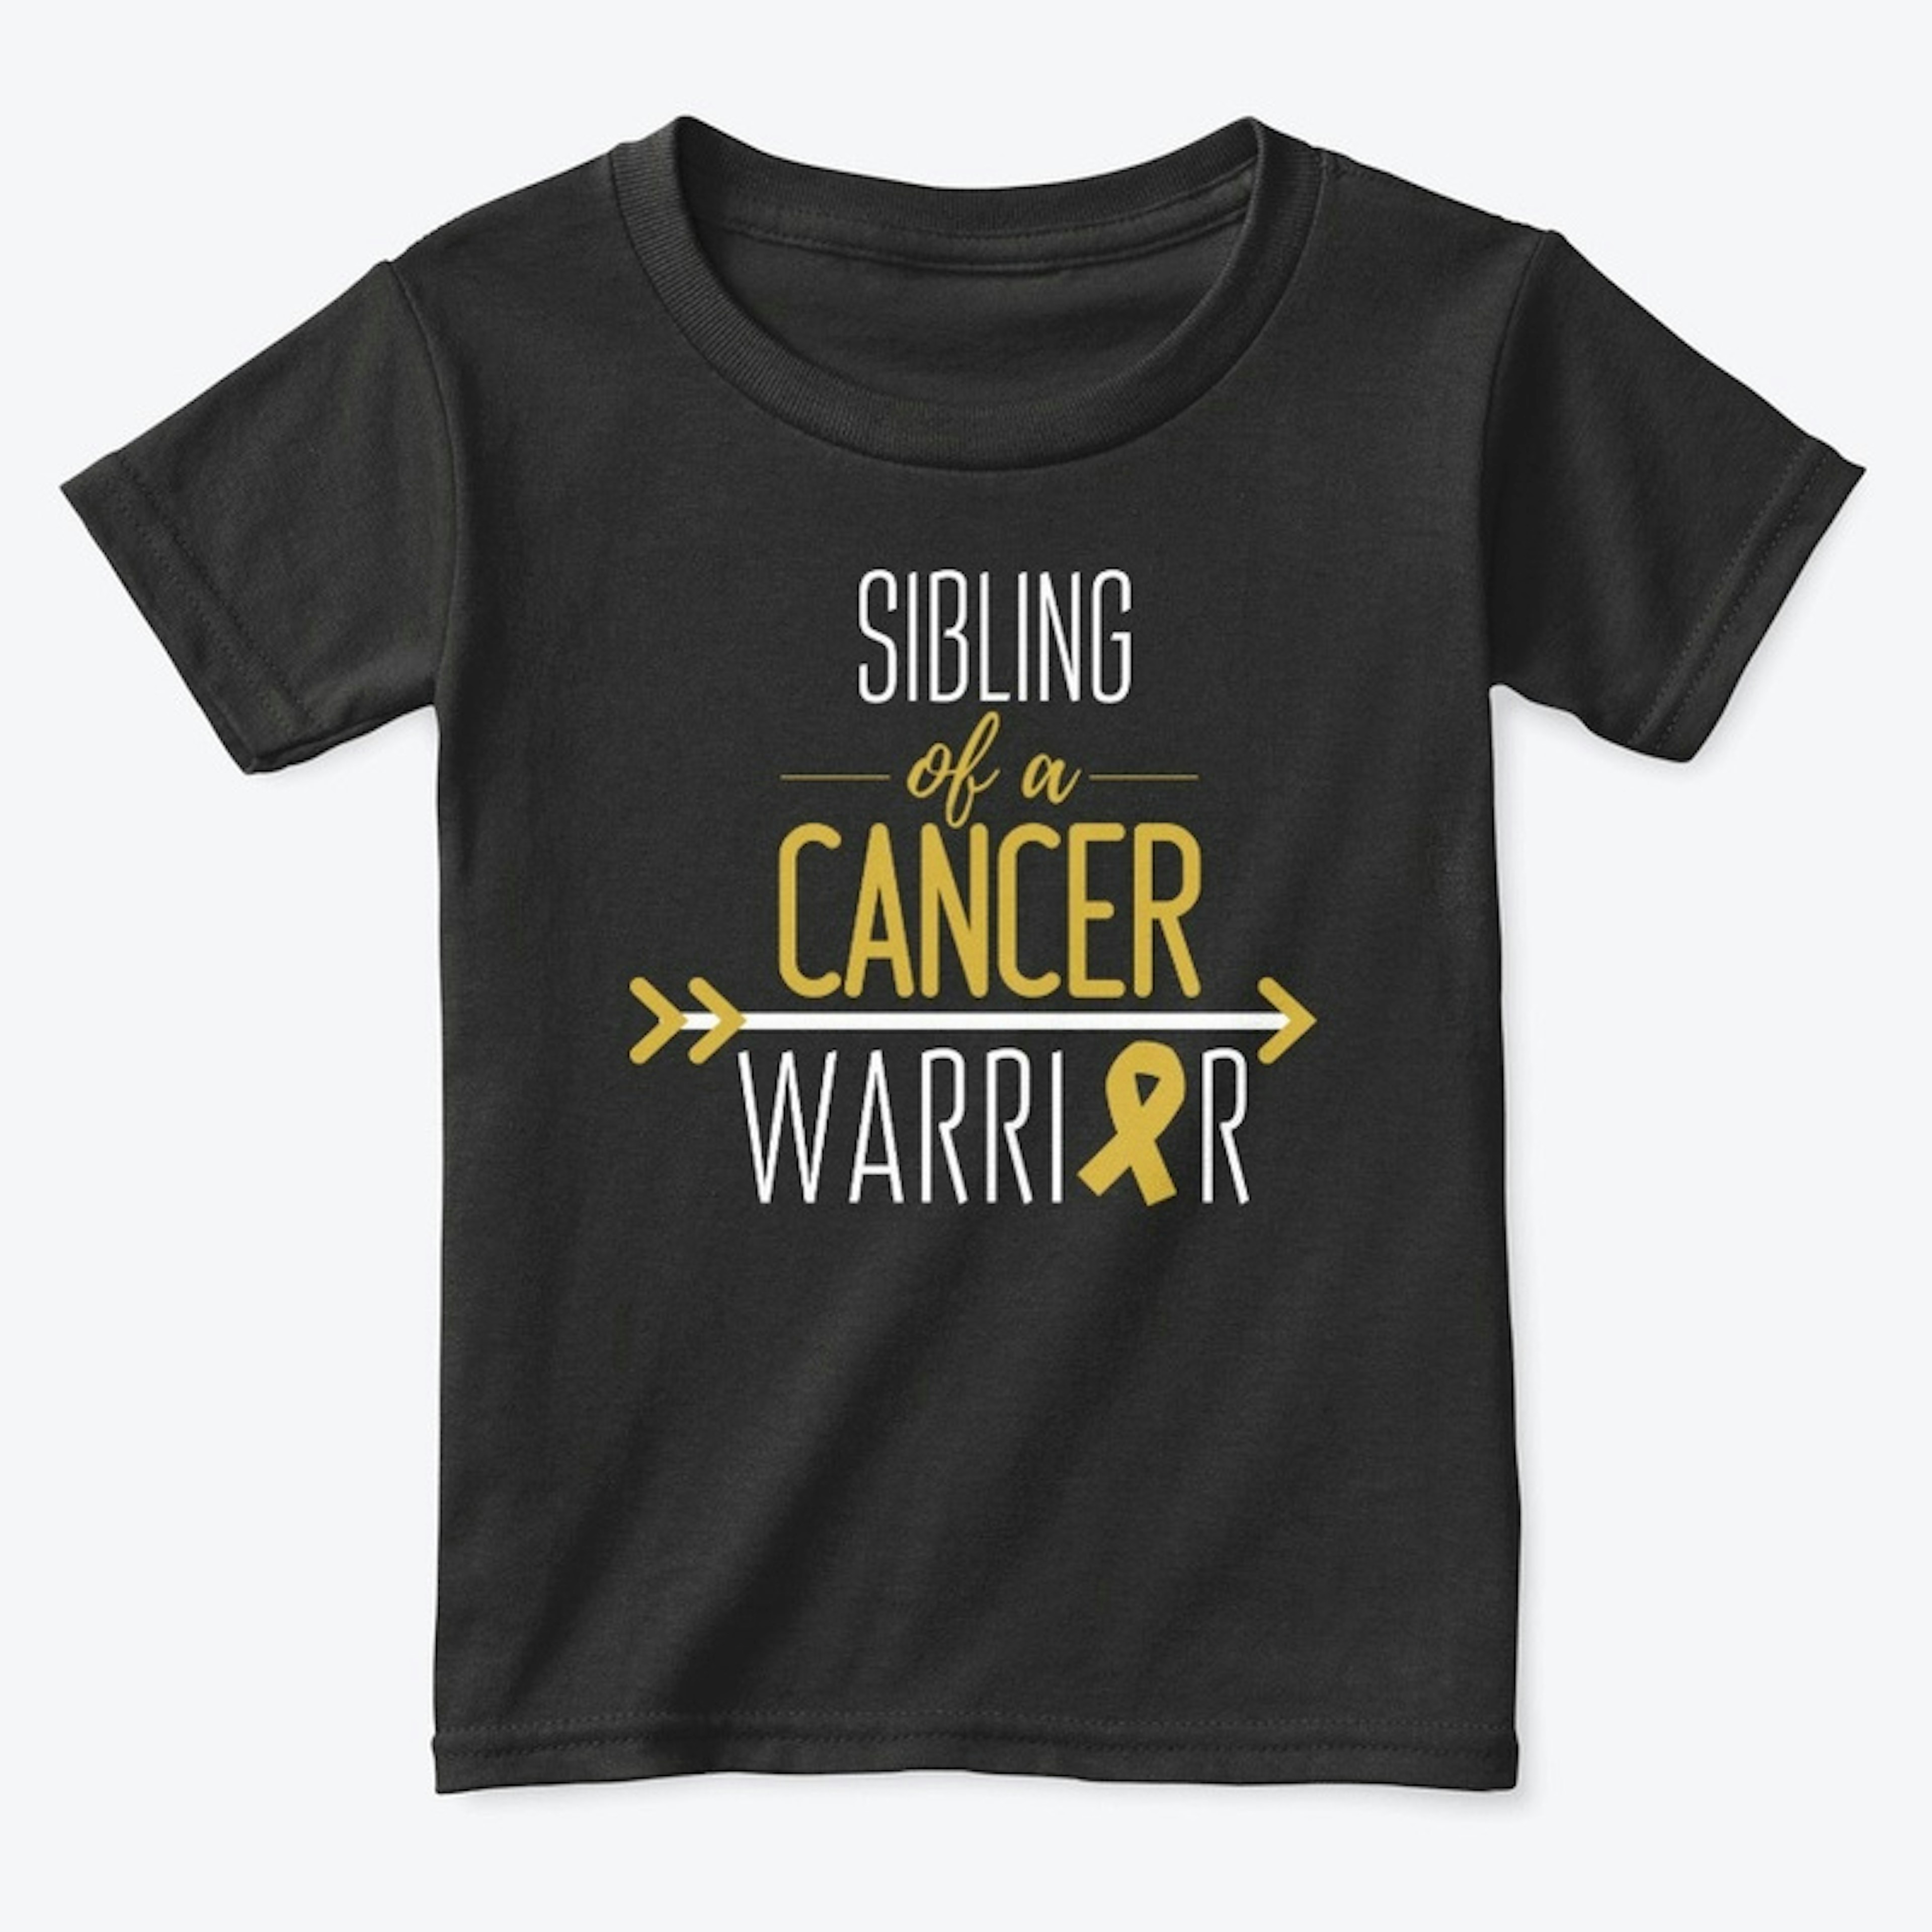 Sibling (Child Size) of a Cancer Warrior